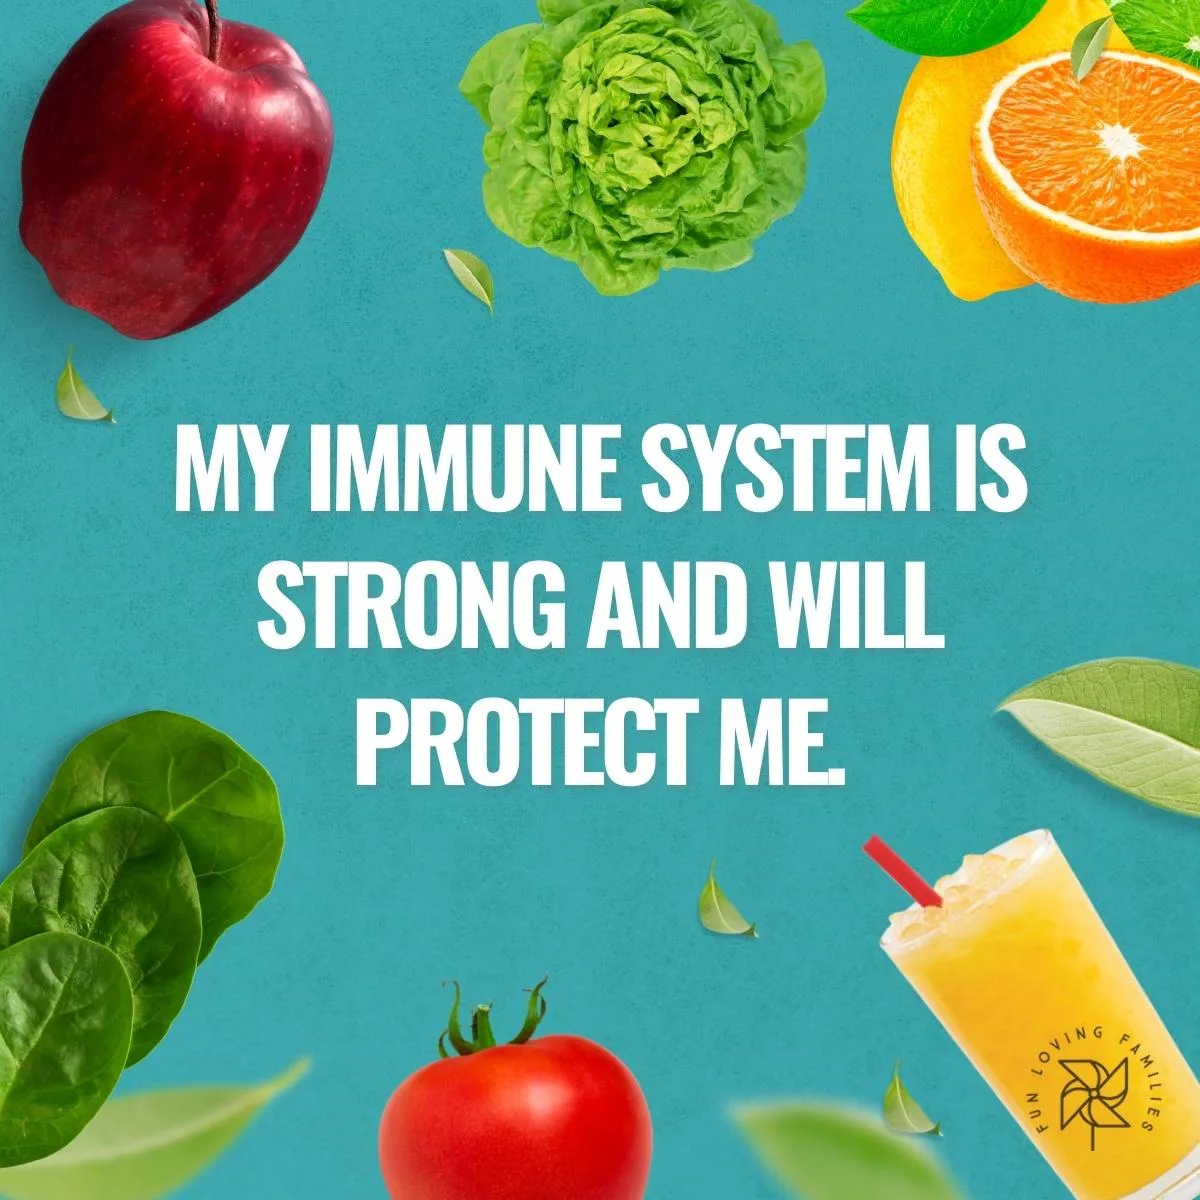 My immune system is strong and will protect me affirmation